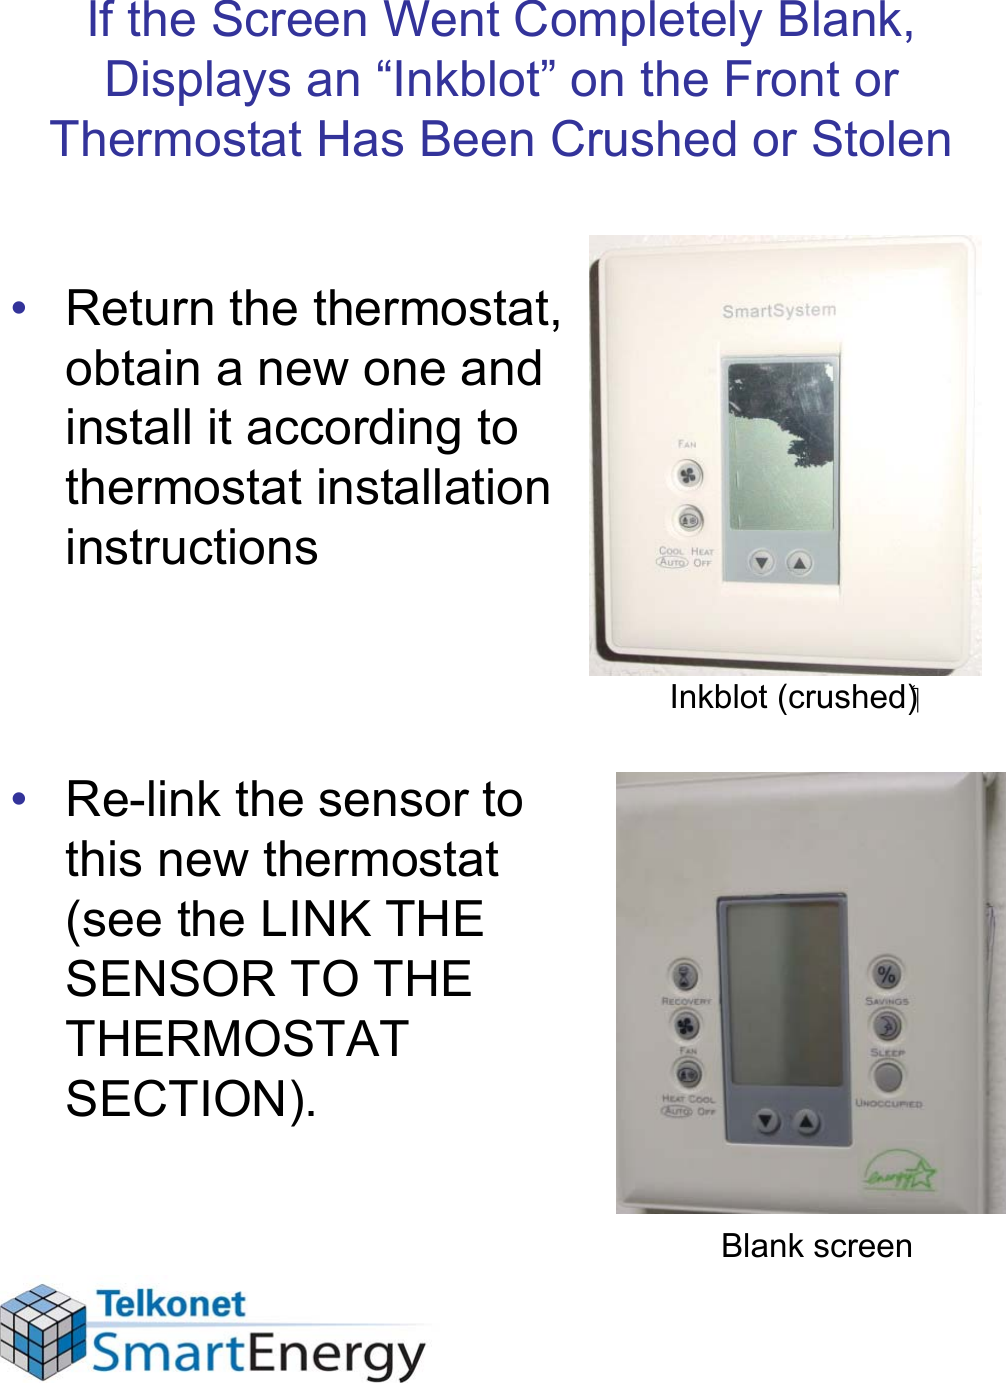 If the Screen Went Completely Blank, Displays an “Inkblot” on the Front or Thermostat Has Been Crushed or Stolen• Return the thermostat, obtain a new one and install it according to thermostat installation instructions• Re-link the sensor to this new thermostat (see the LINK THE SENSOR TO THE THERMOSTAT SECTION).Blank screenInkblot (crushed)‏